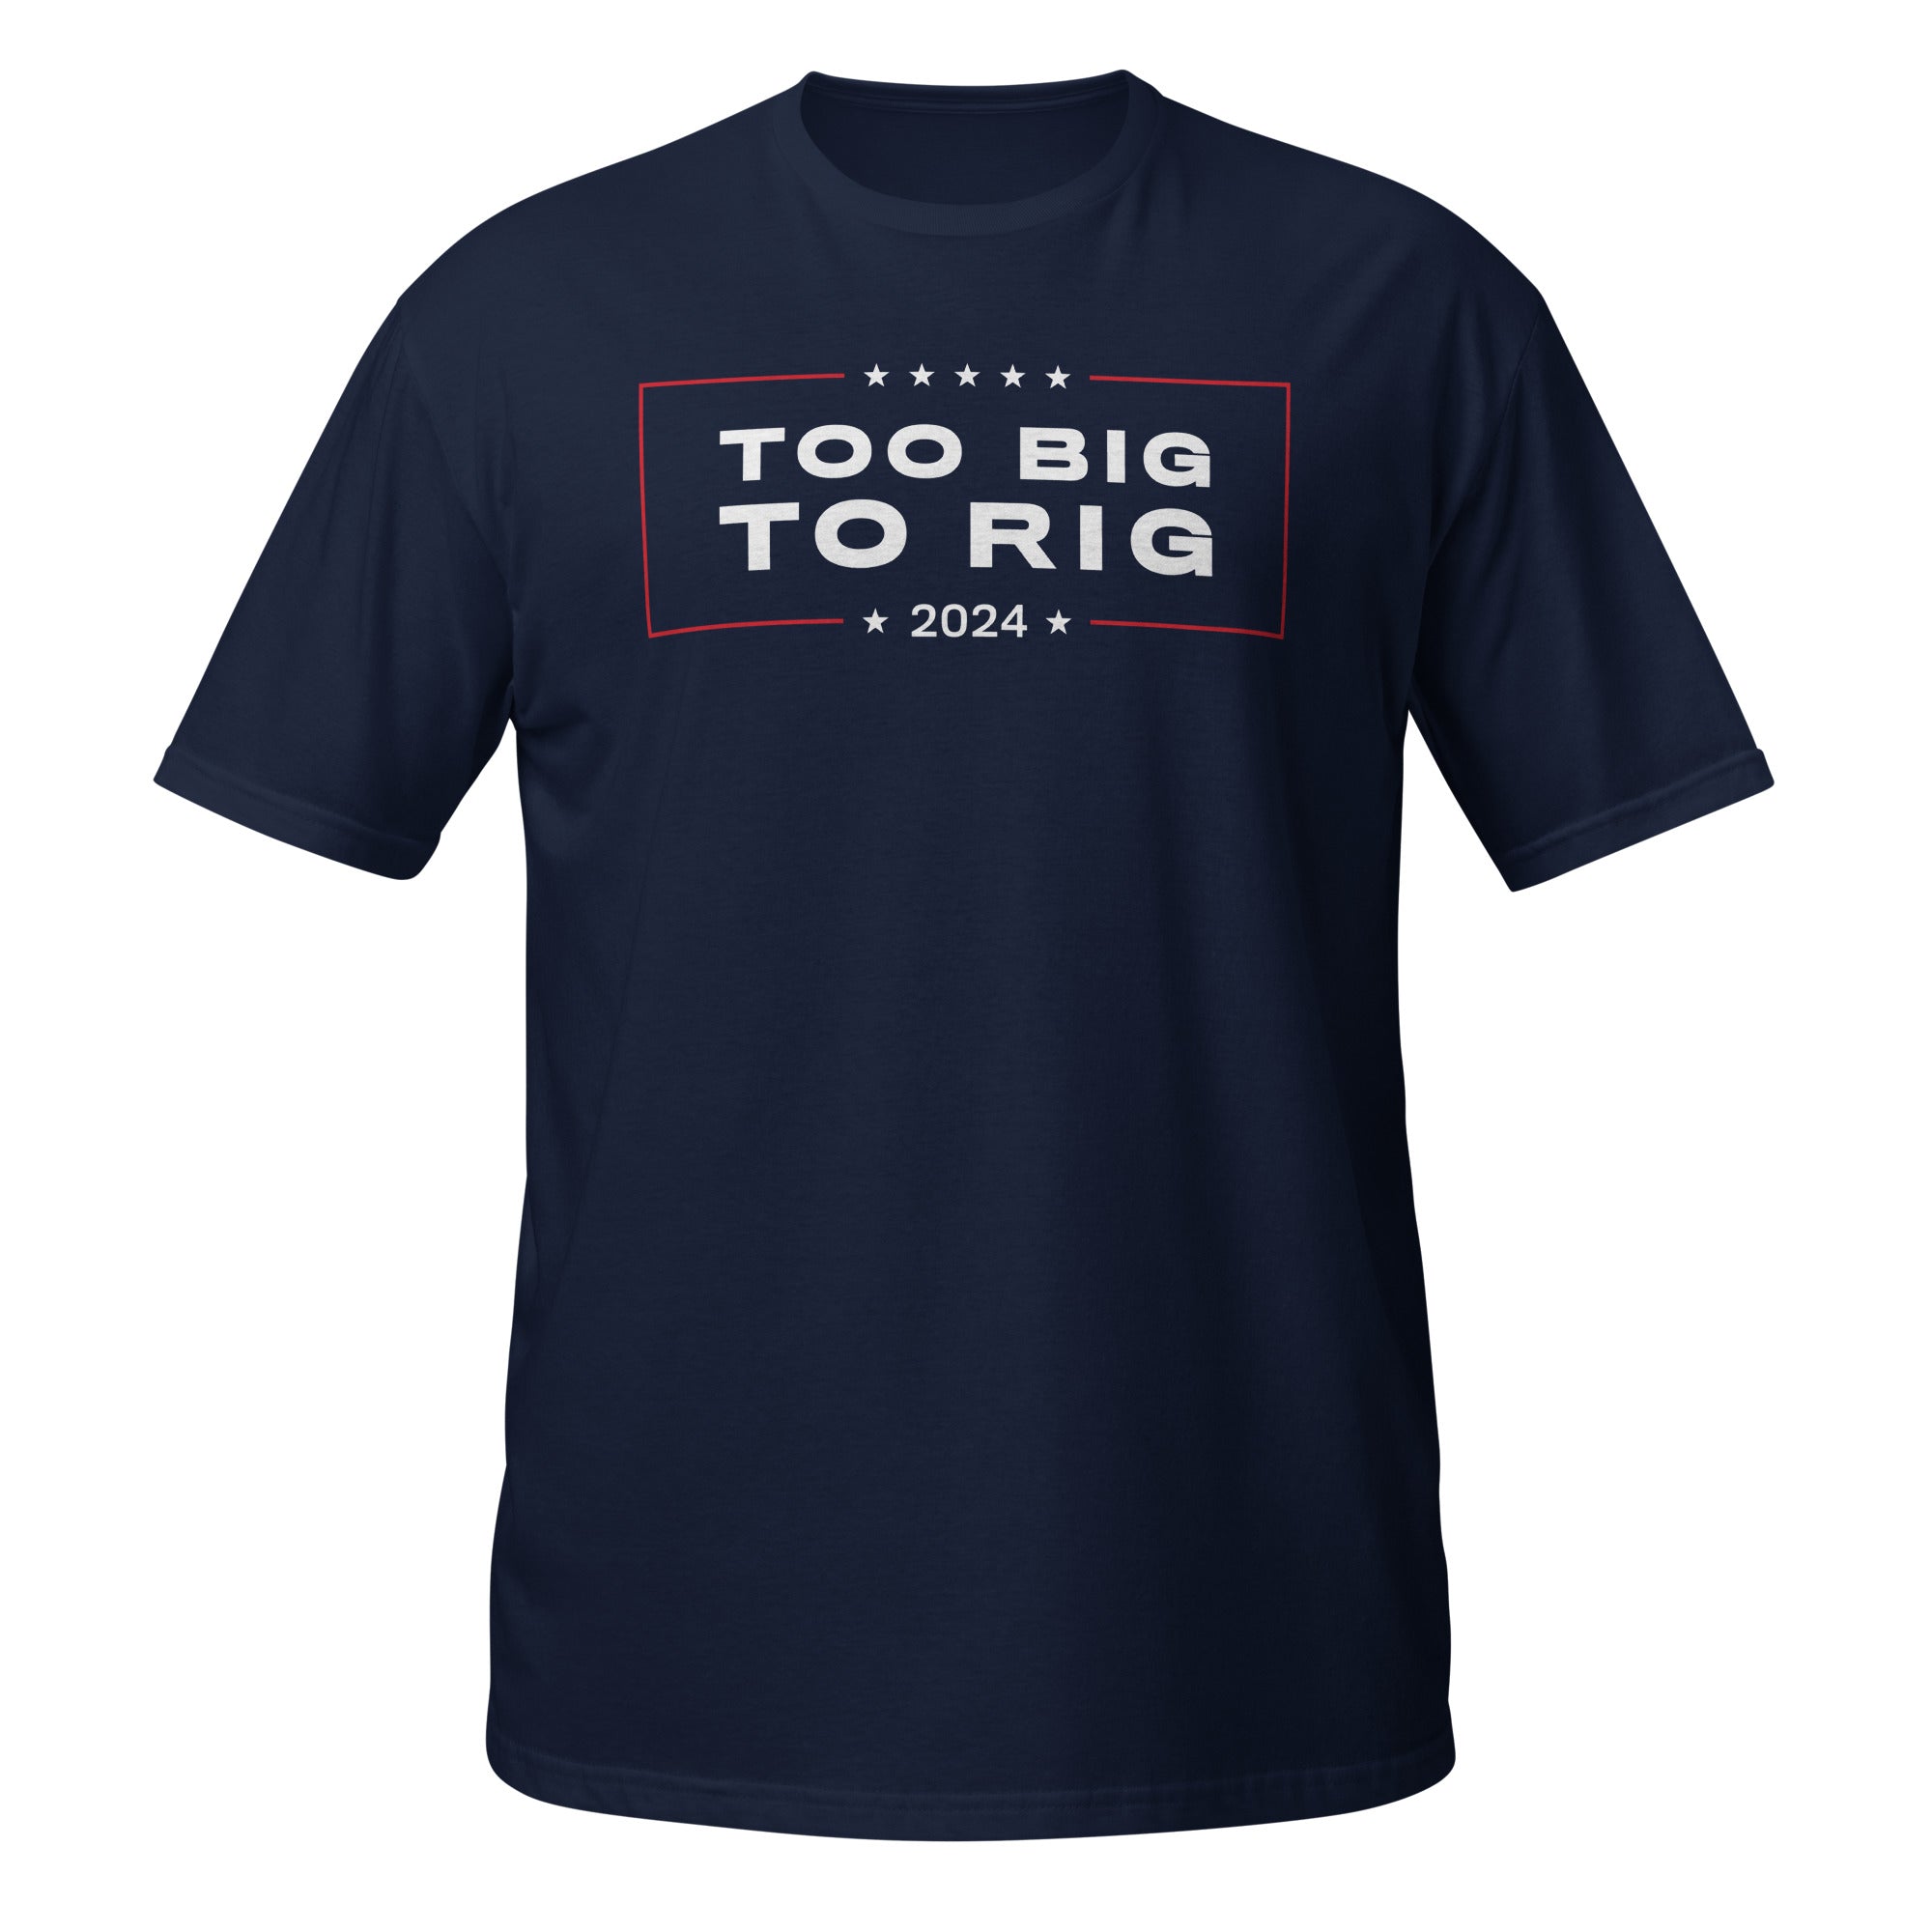 Too Big To Rig 2024 Short-Sleeve T-Shirt